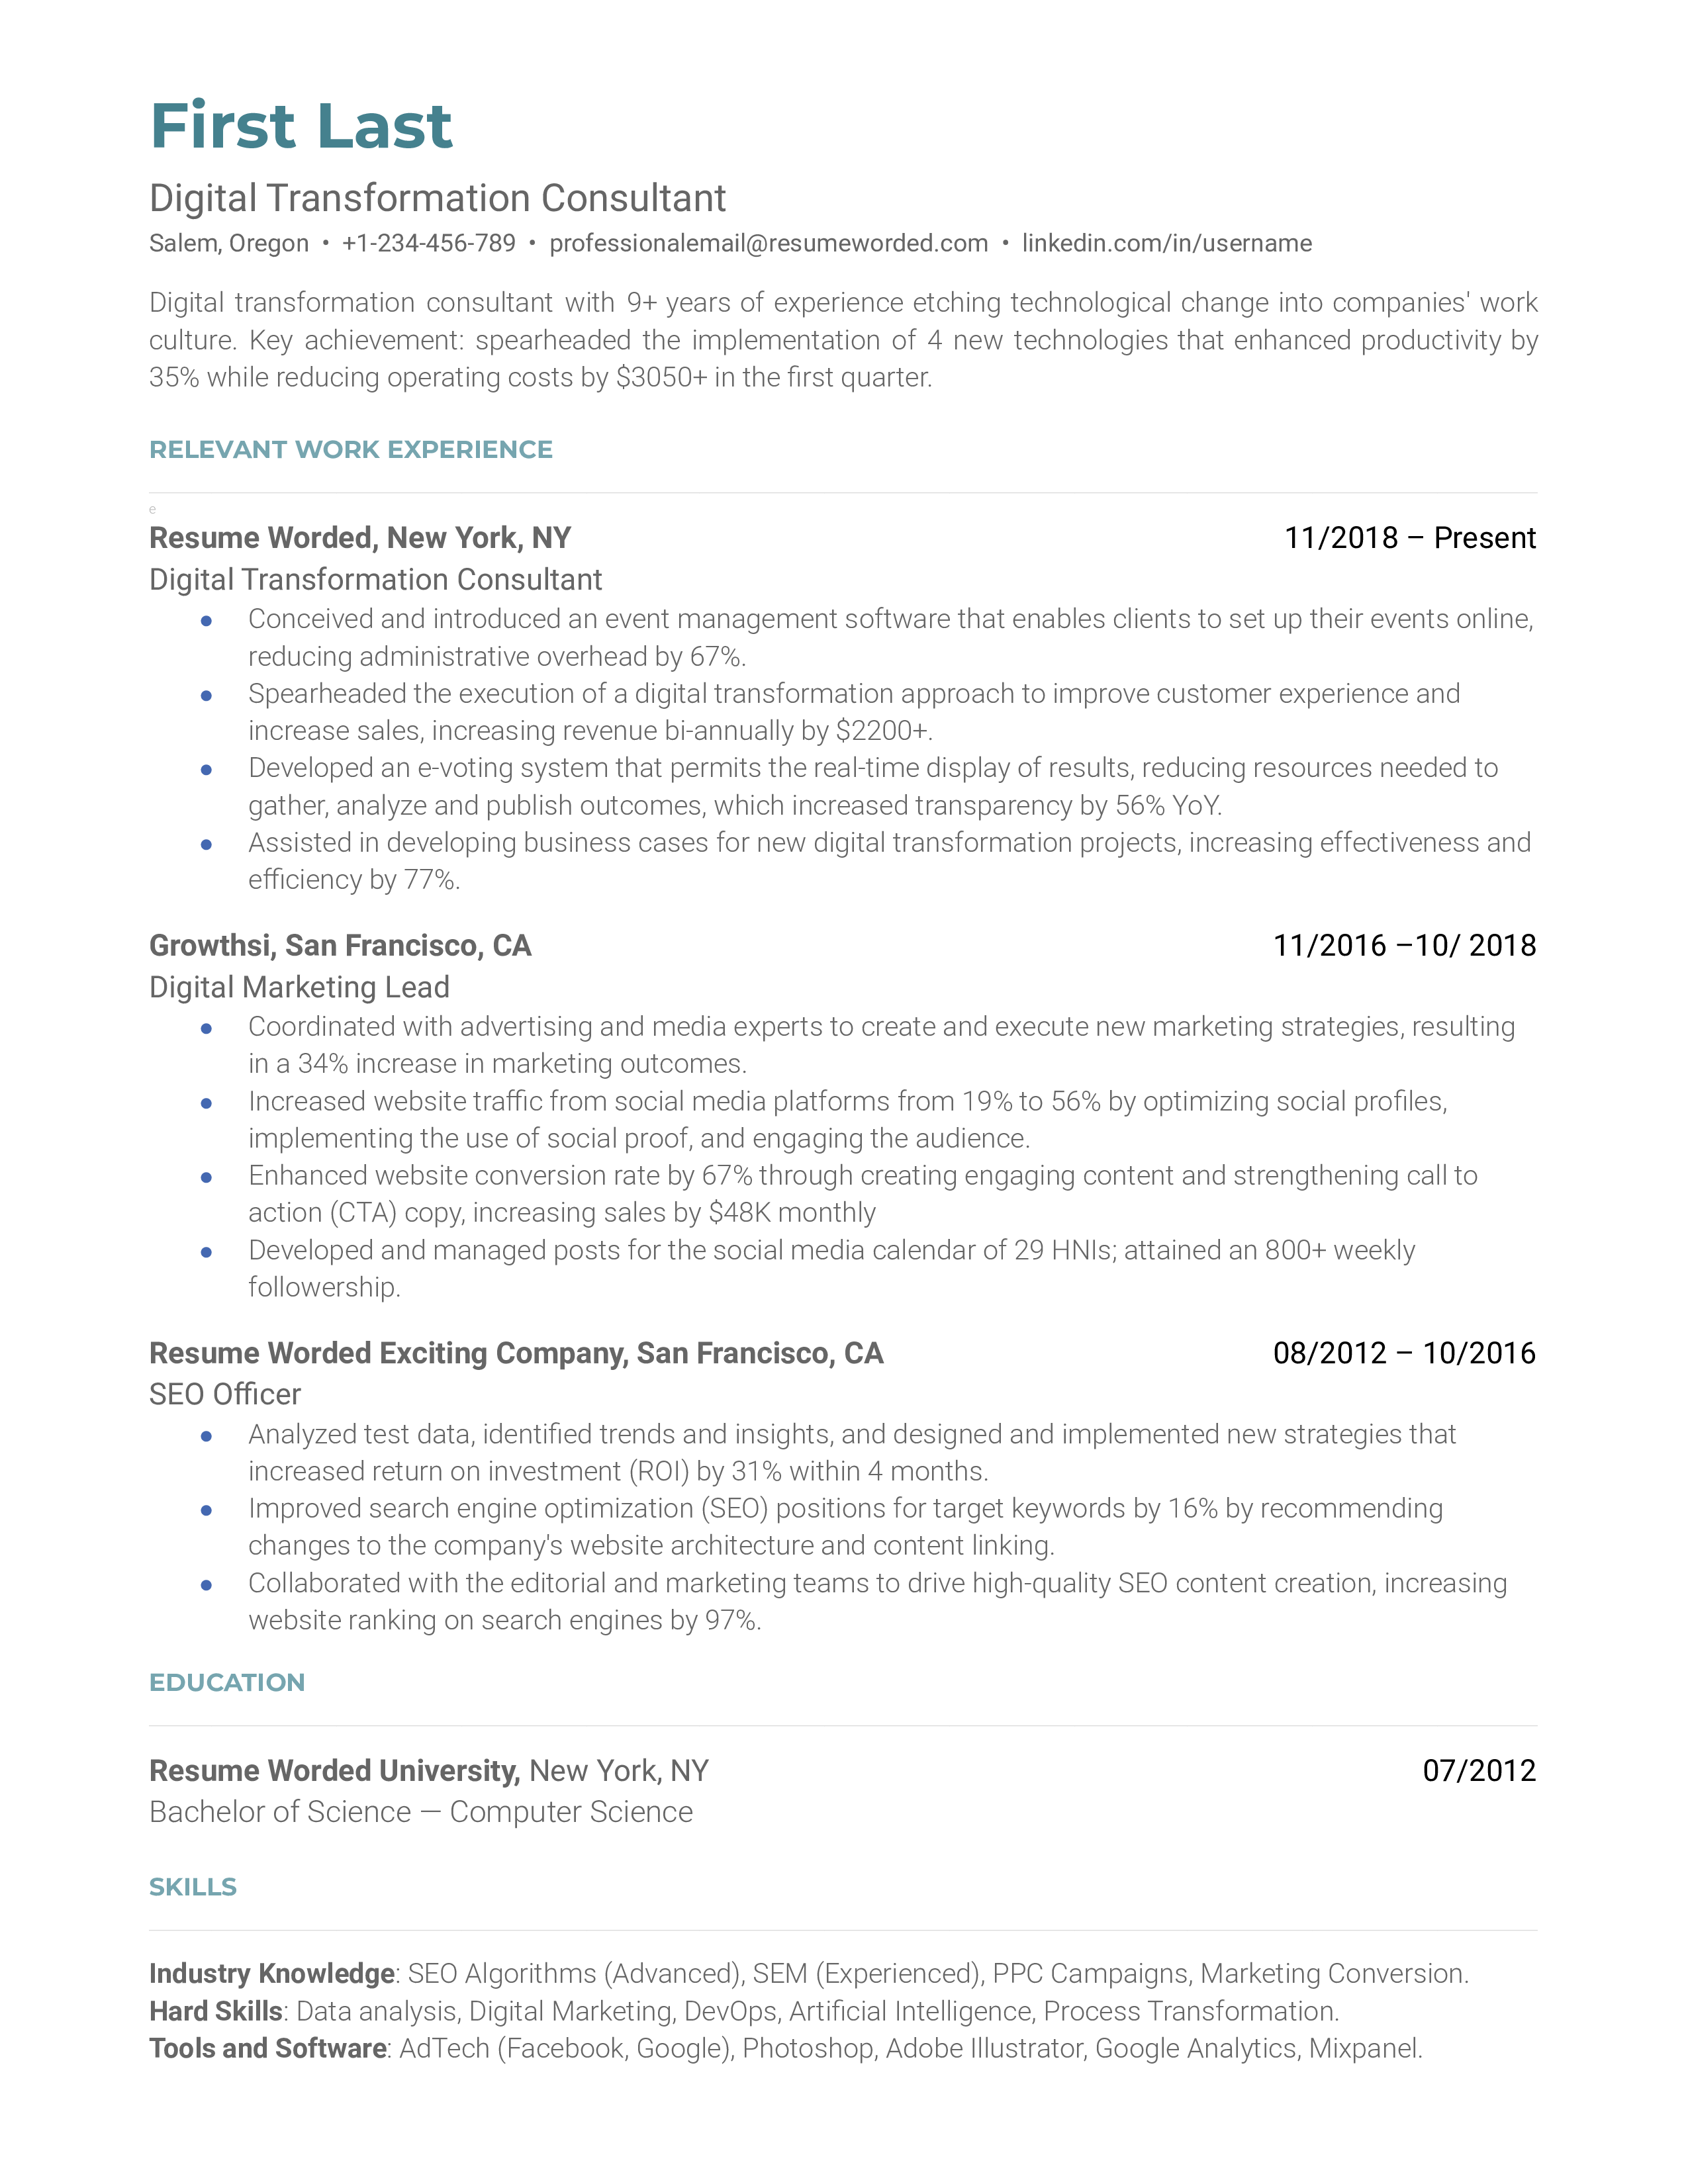 A well-structured CV showcasing tech expertise, implementation skills, and grasp of digital trends.